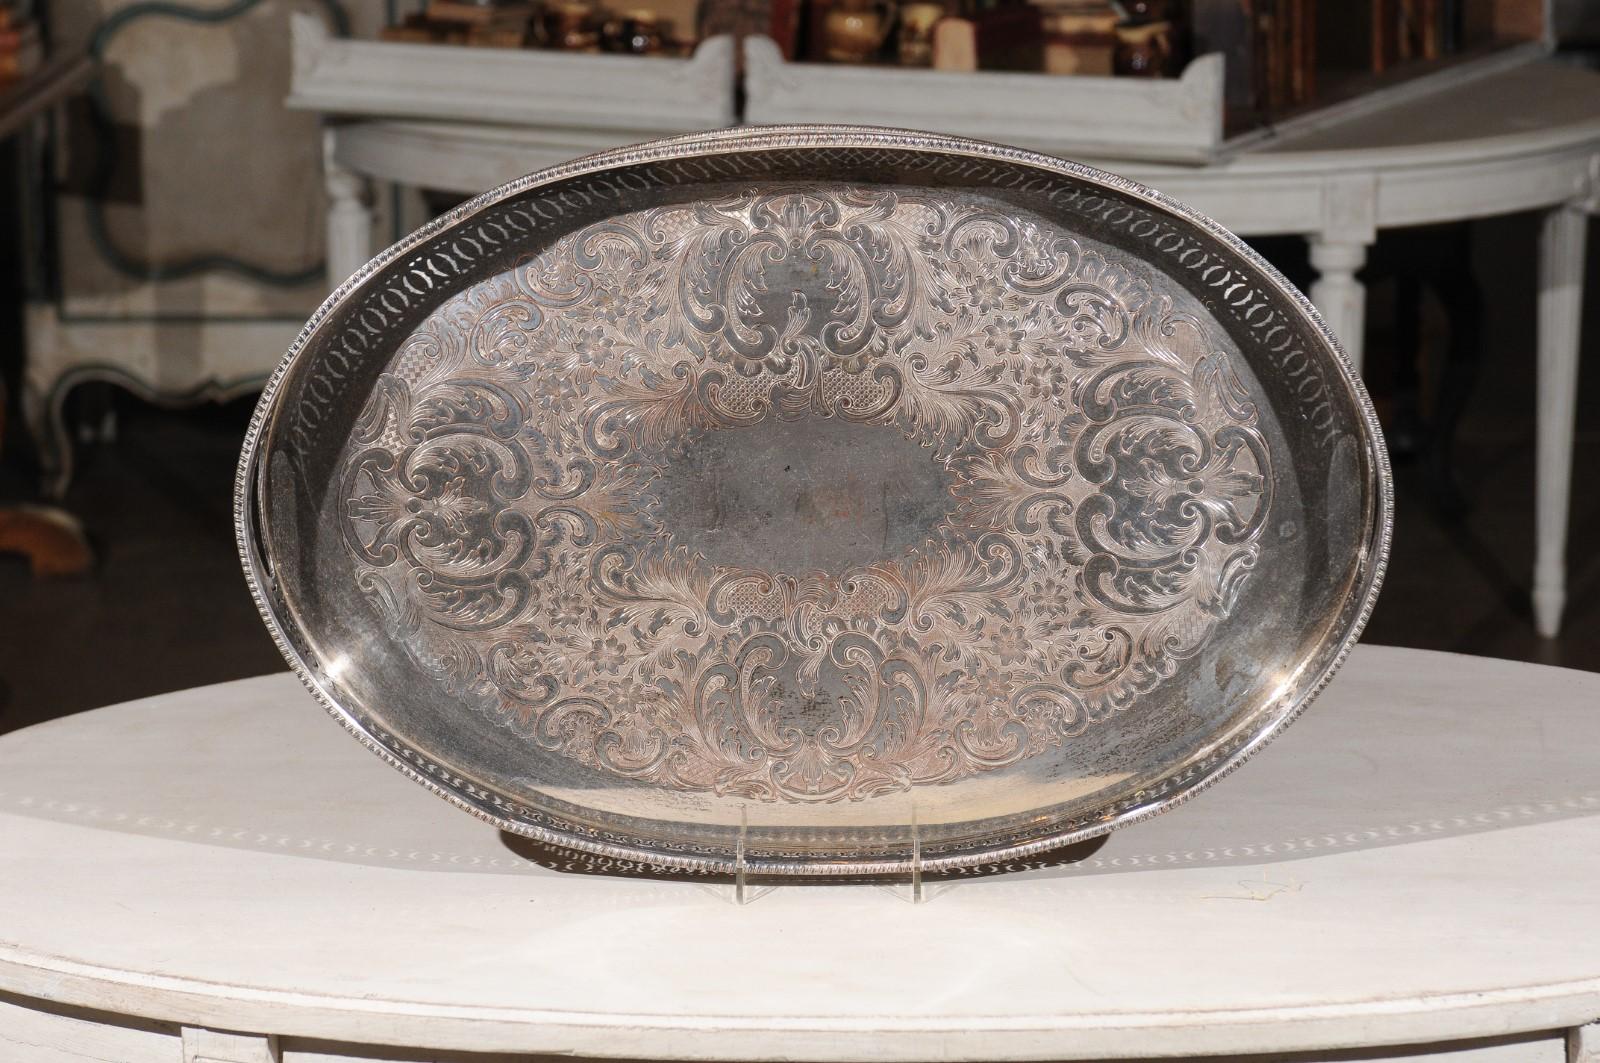 An English Edwardian period silver plated tray from the early 20th century, with pierced motifs, C-scroll design and oxidized patina. Born in England in the early years of King Edward VII's reign, this exquisite silver plated tray features an oval